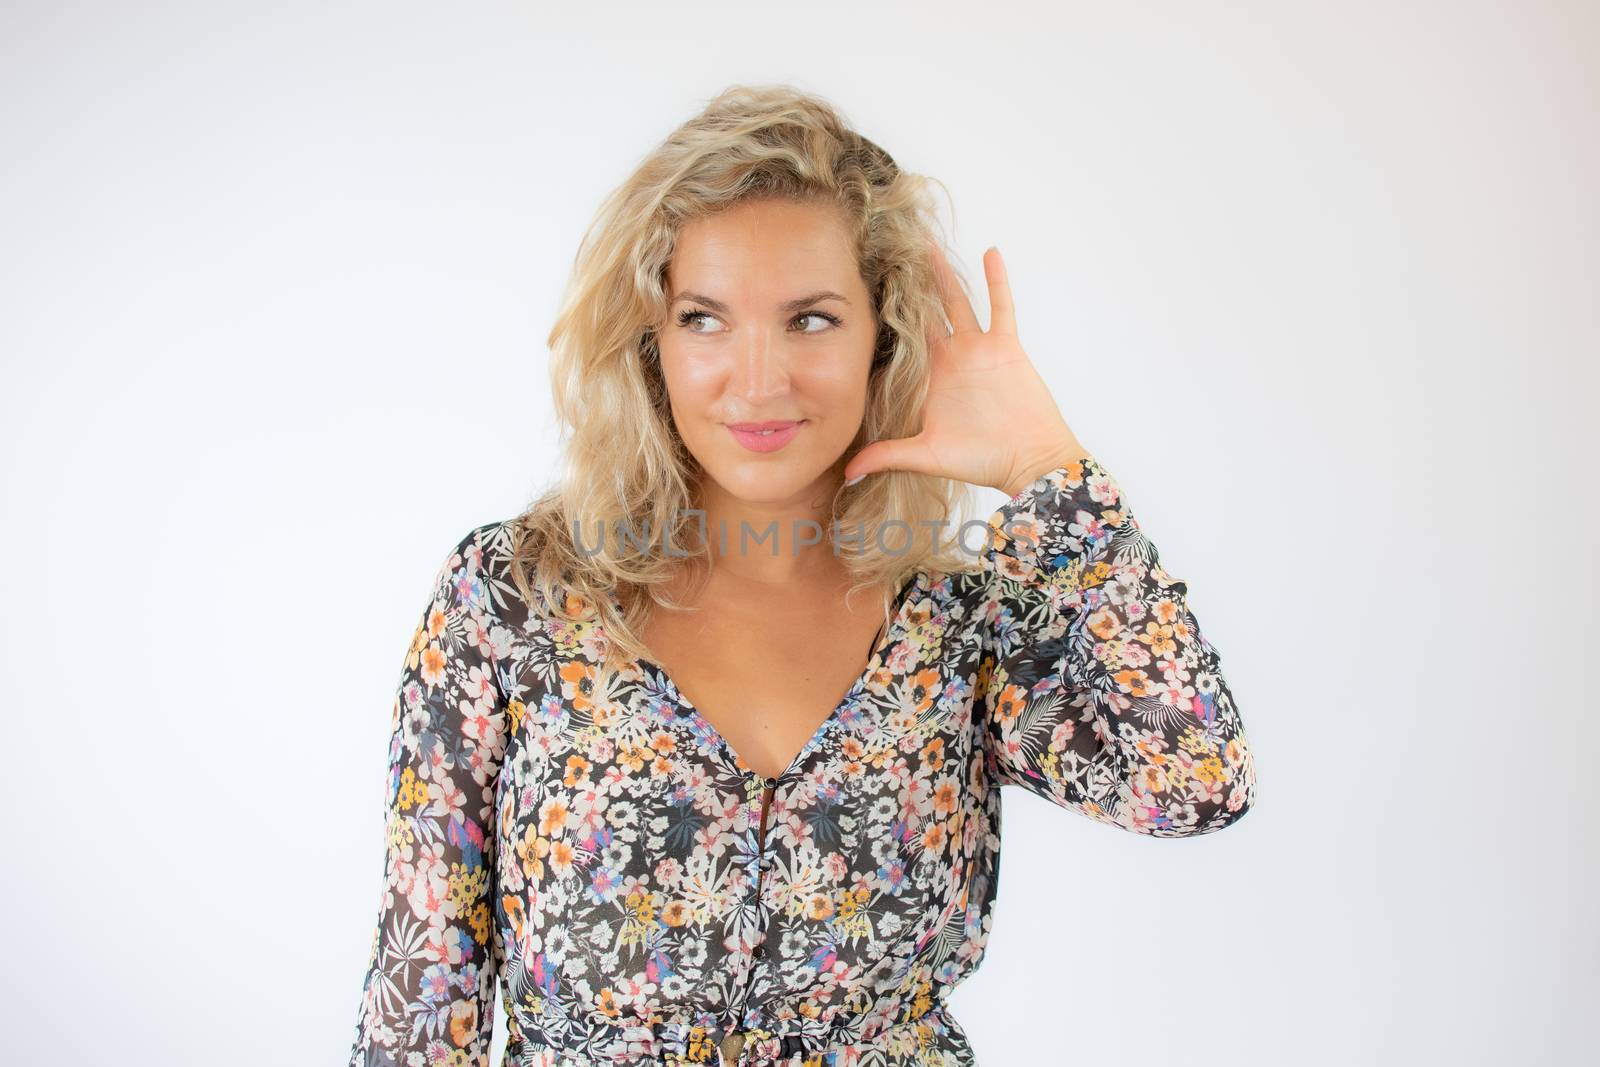 Pretty blonde woman in a flowery dress gesturing on white background